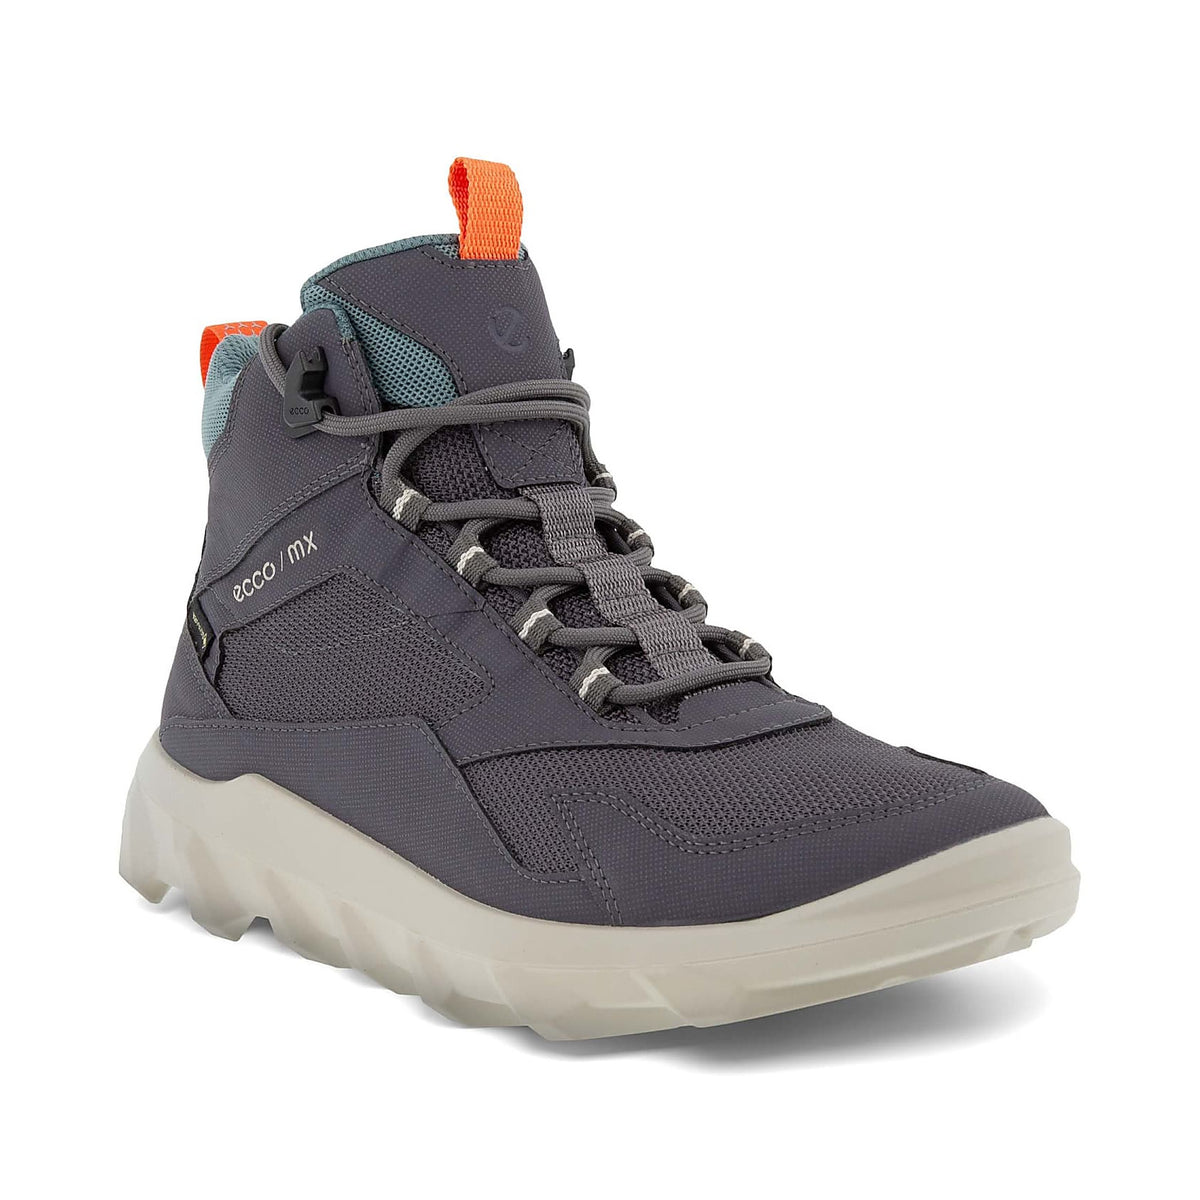 Mid-Cut GORE-TEX Weight Hiking Boot - Women's Shoes